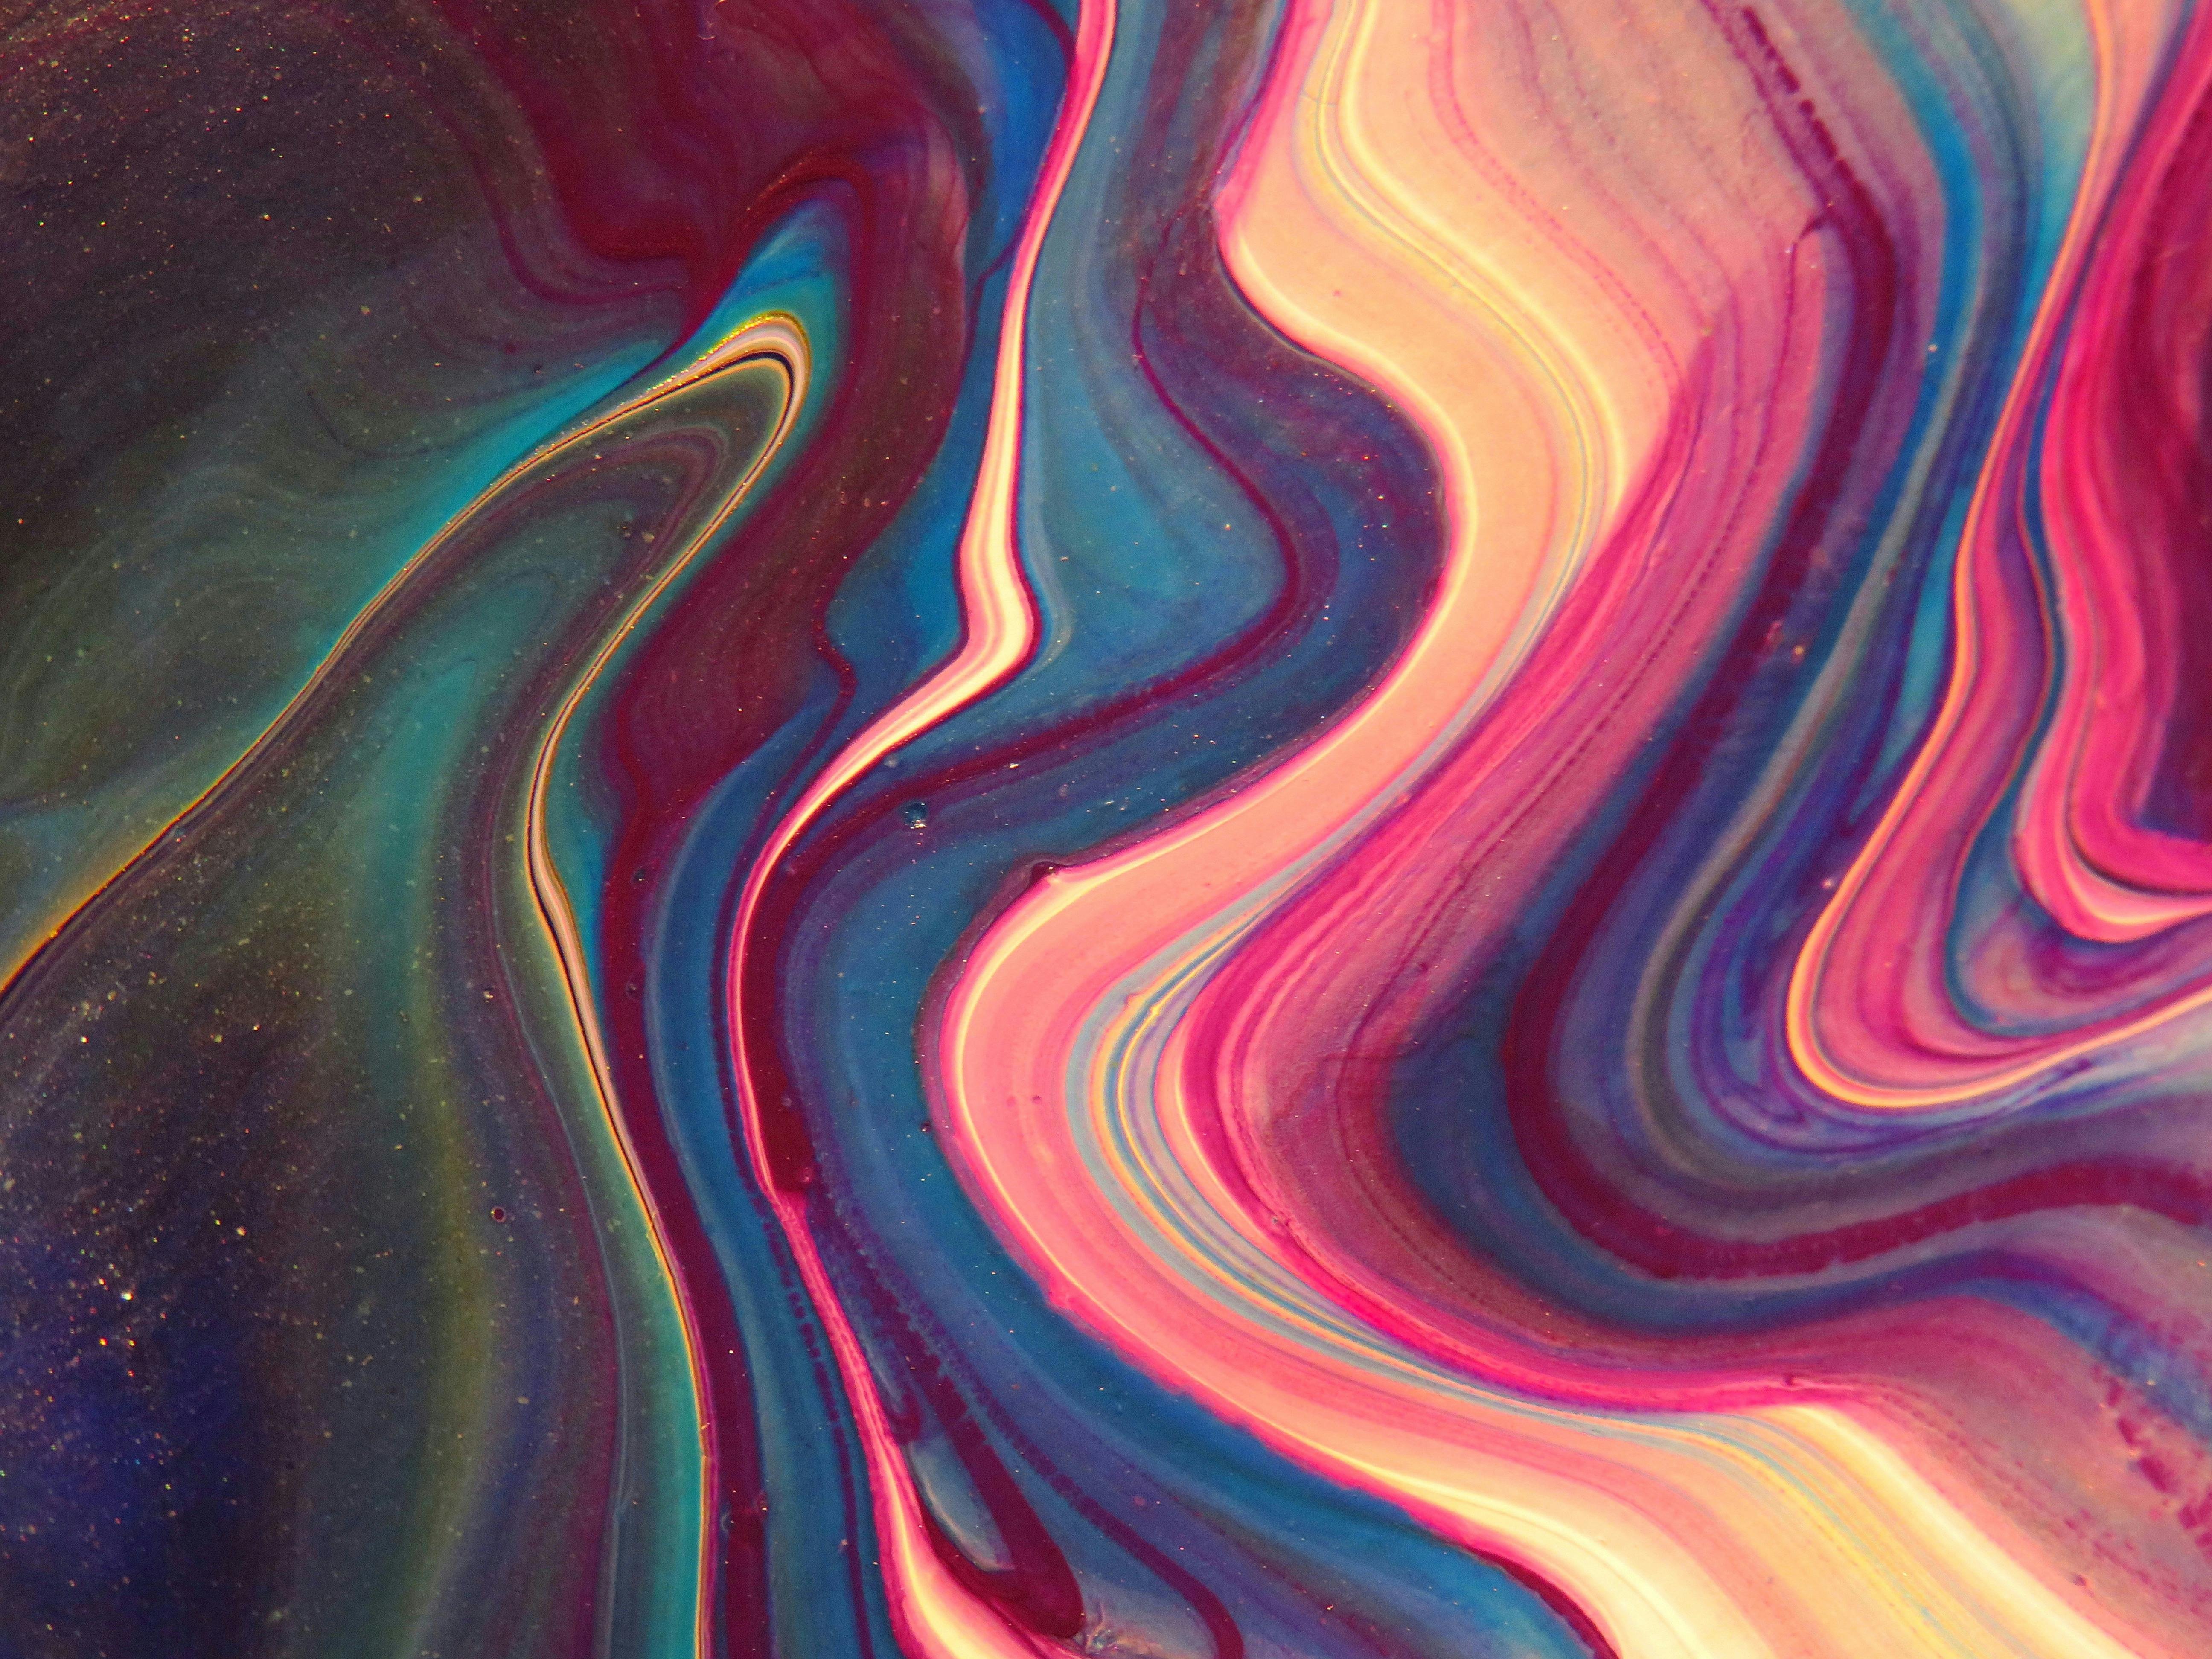 artistic psychedelic wallpapers